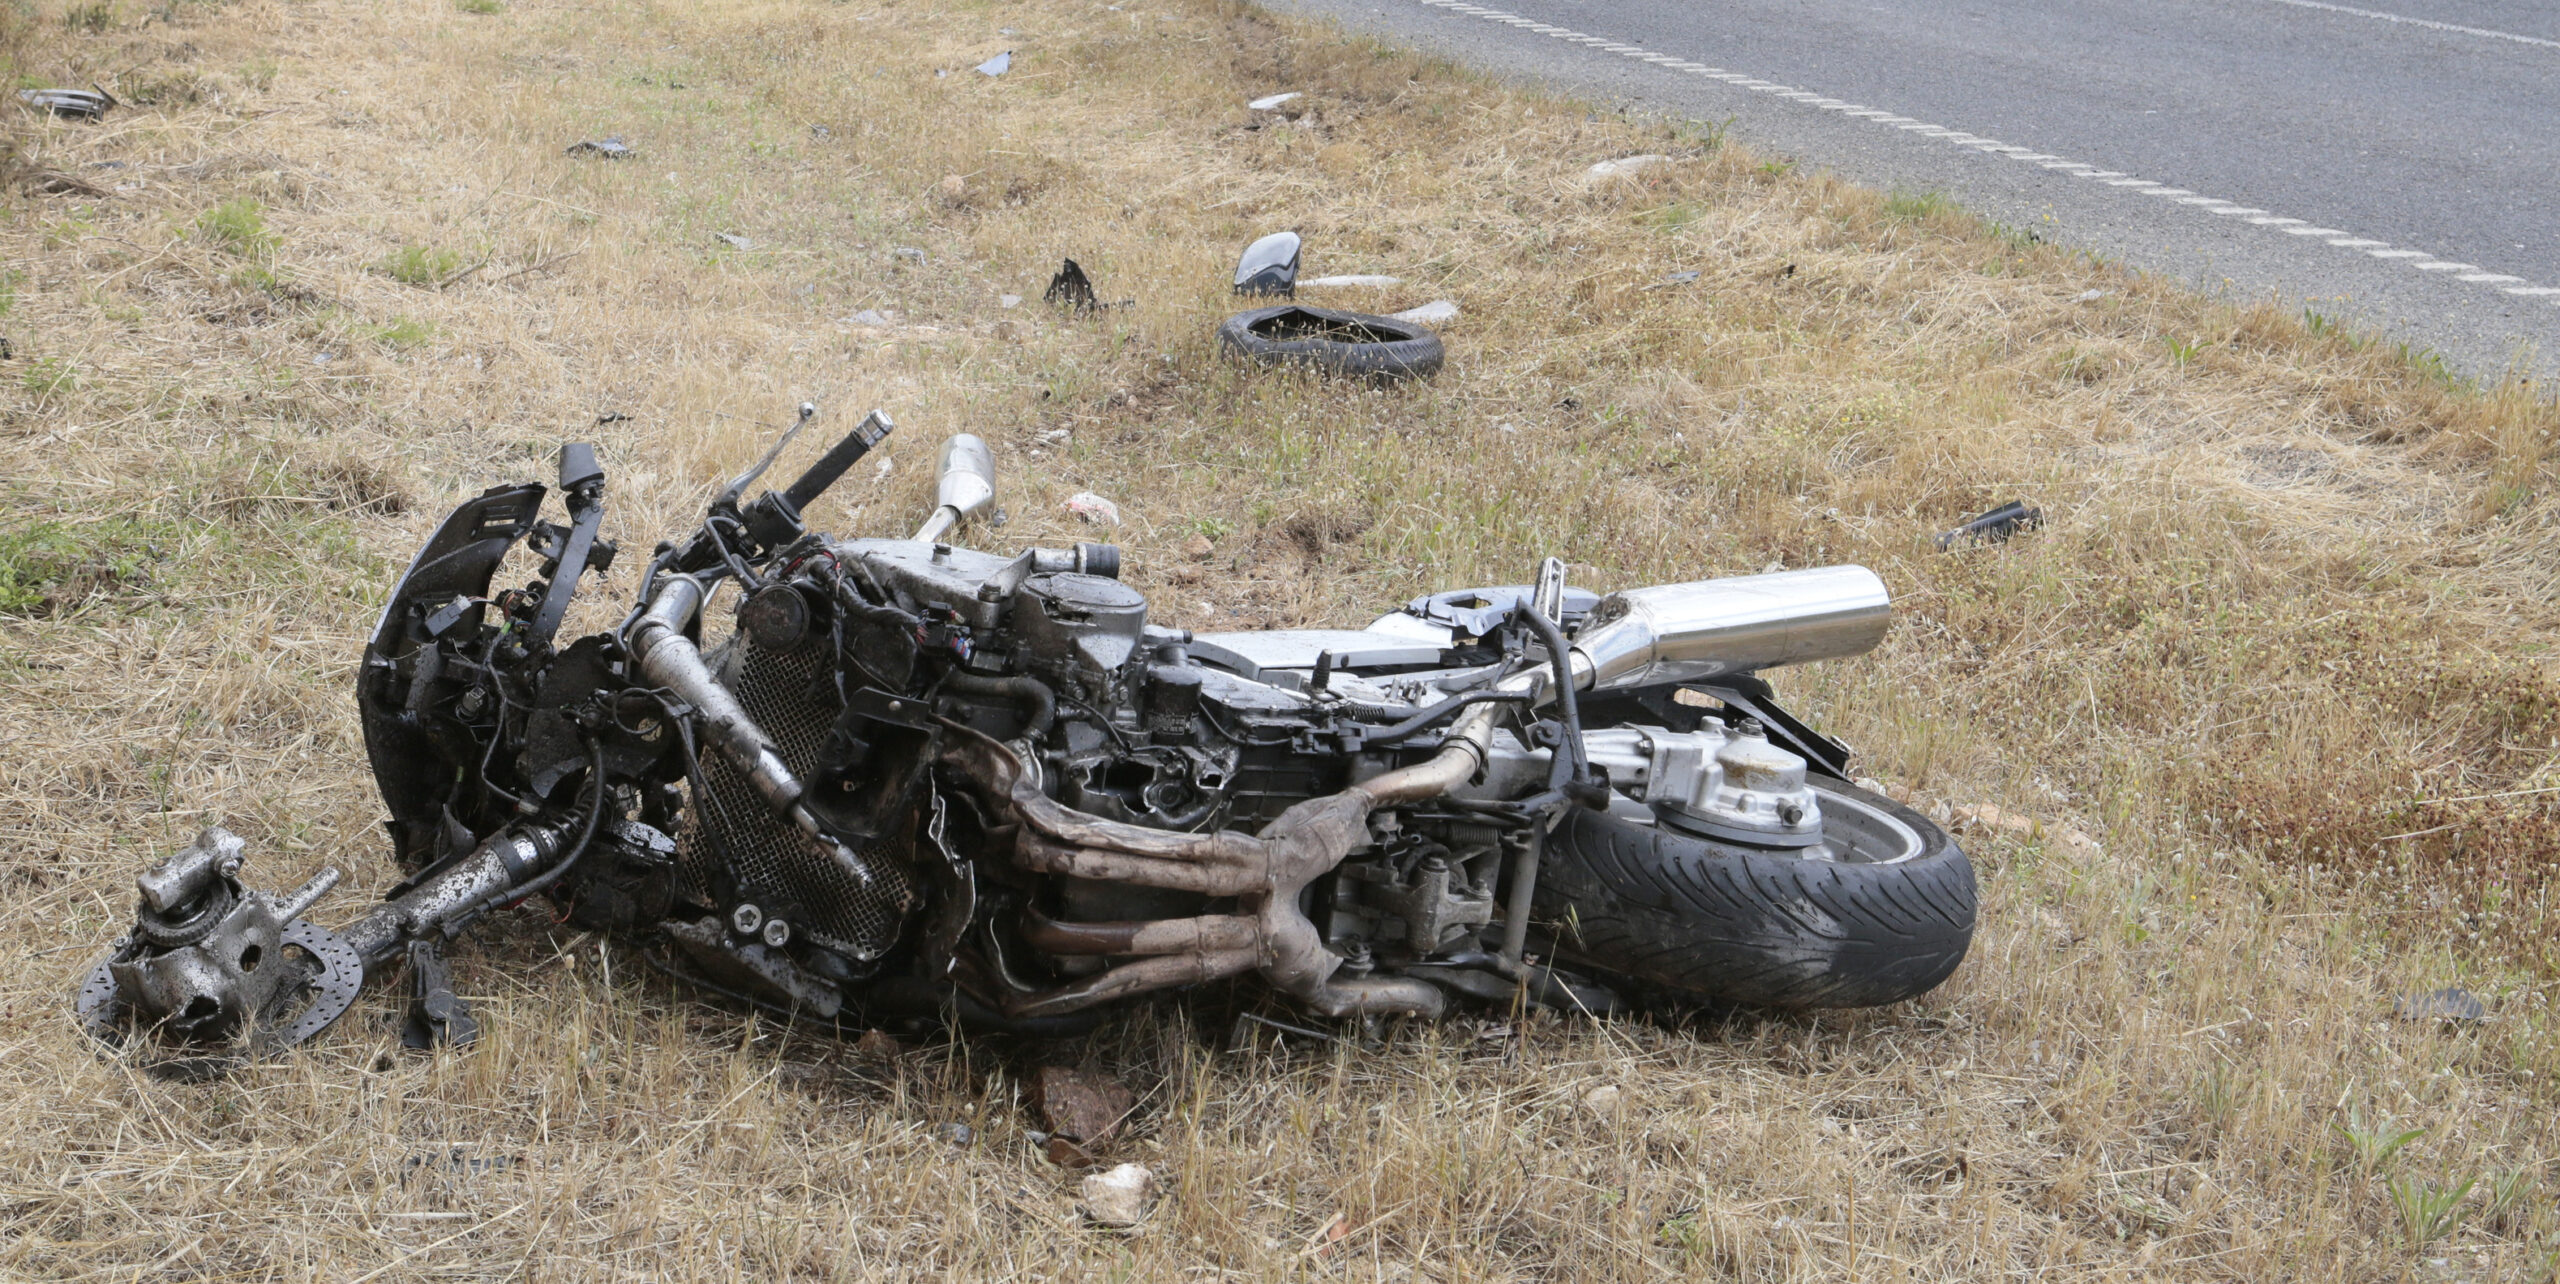 worst motorcycle accidents photos